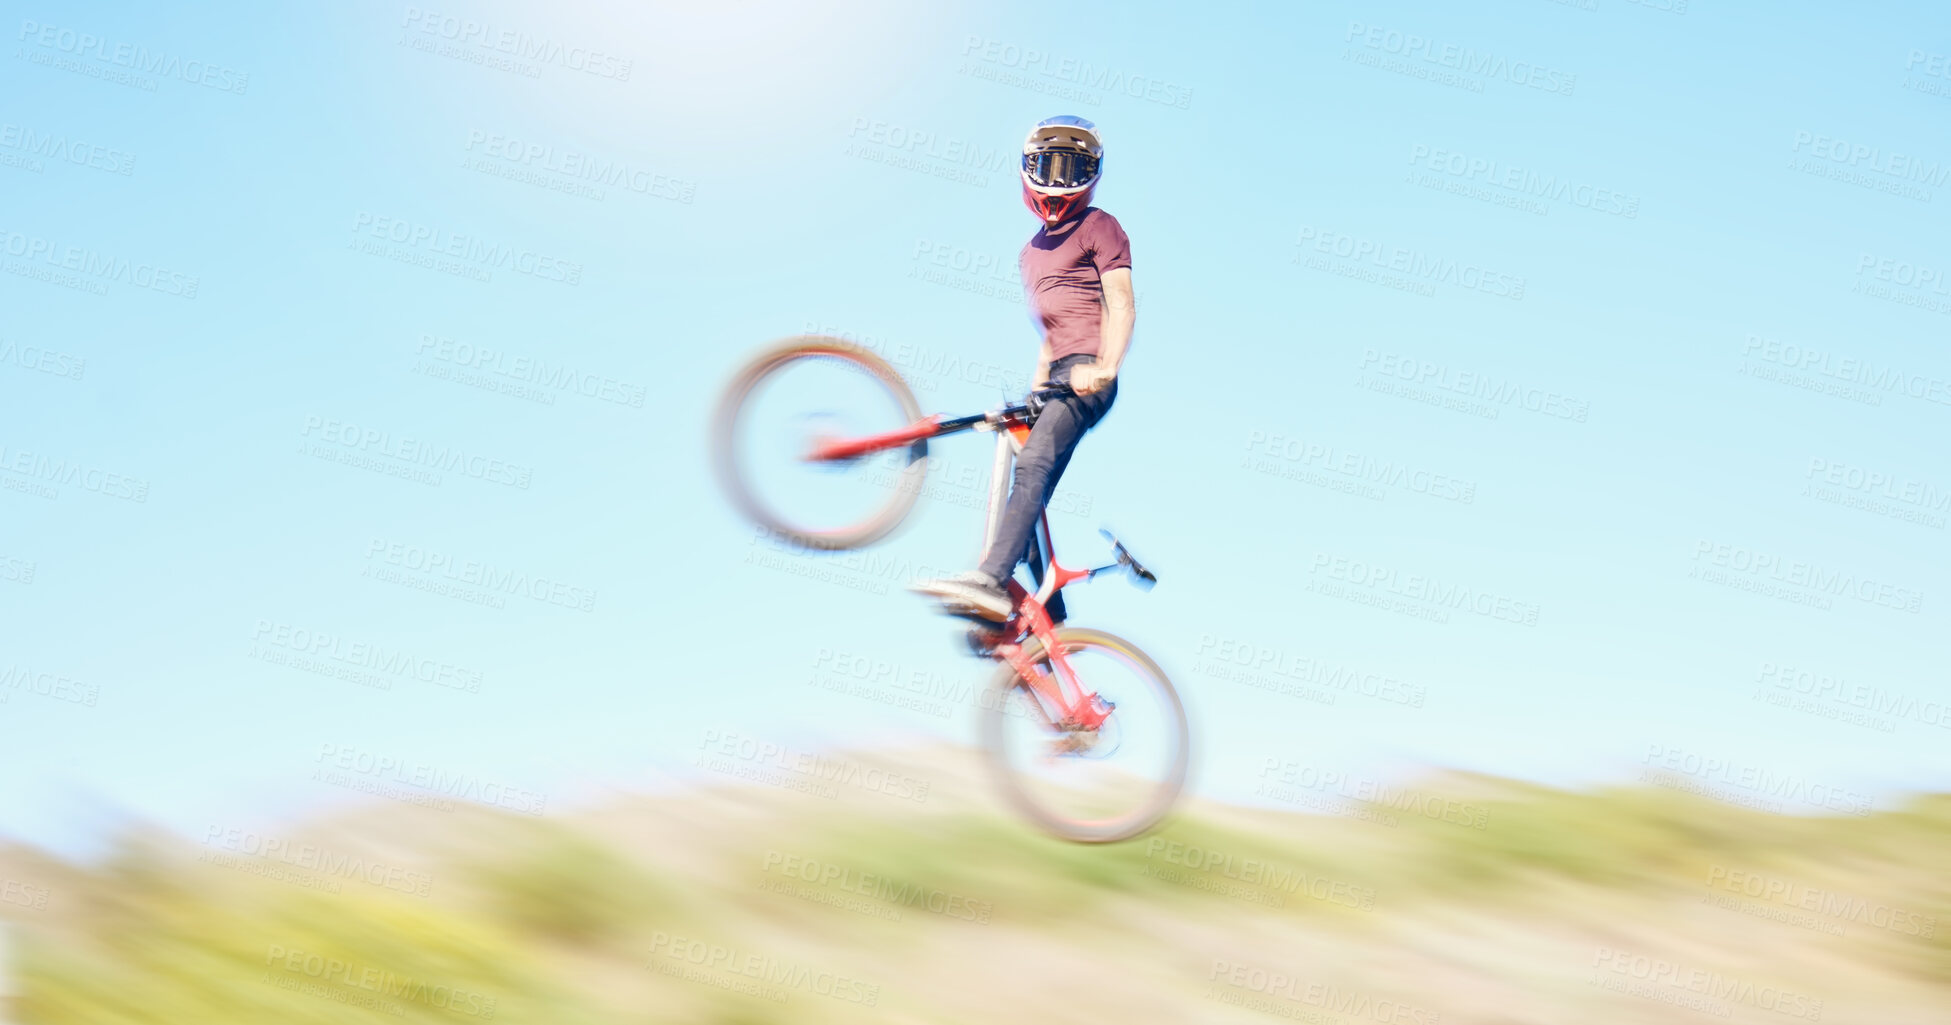 Buy stock photo Blur, air and cyclist cycling in nature training for a competition on trail or path in forest or woods. Freedom, wheelie stunt or athlete riding bicycle to jump in cardio exercise, fitness or workout